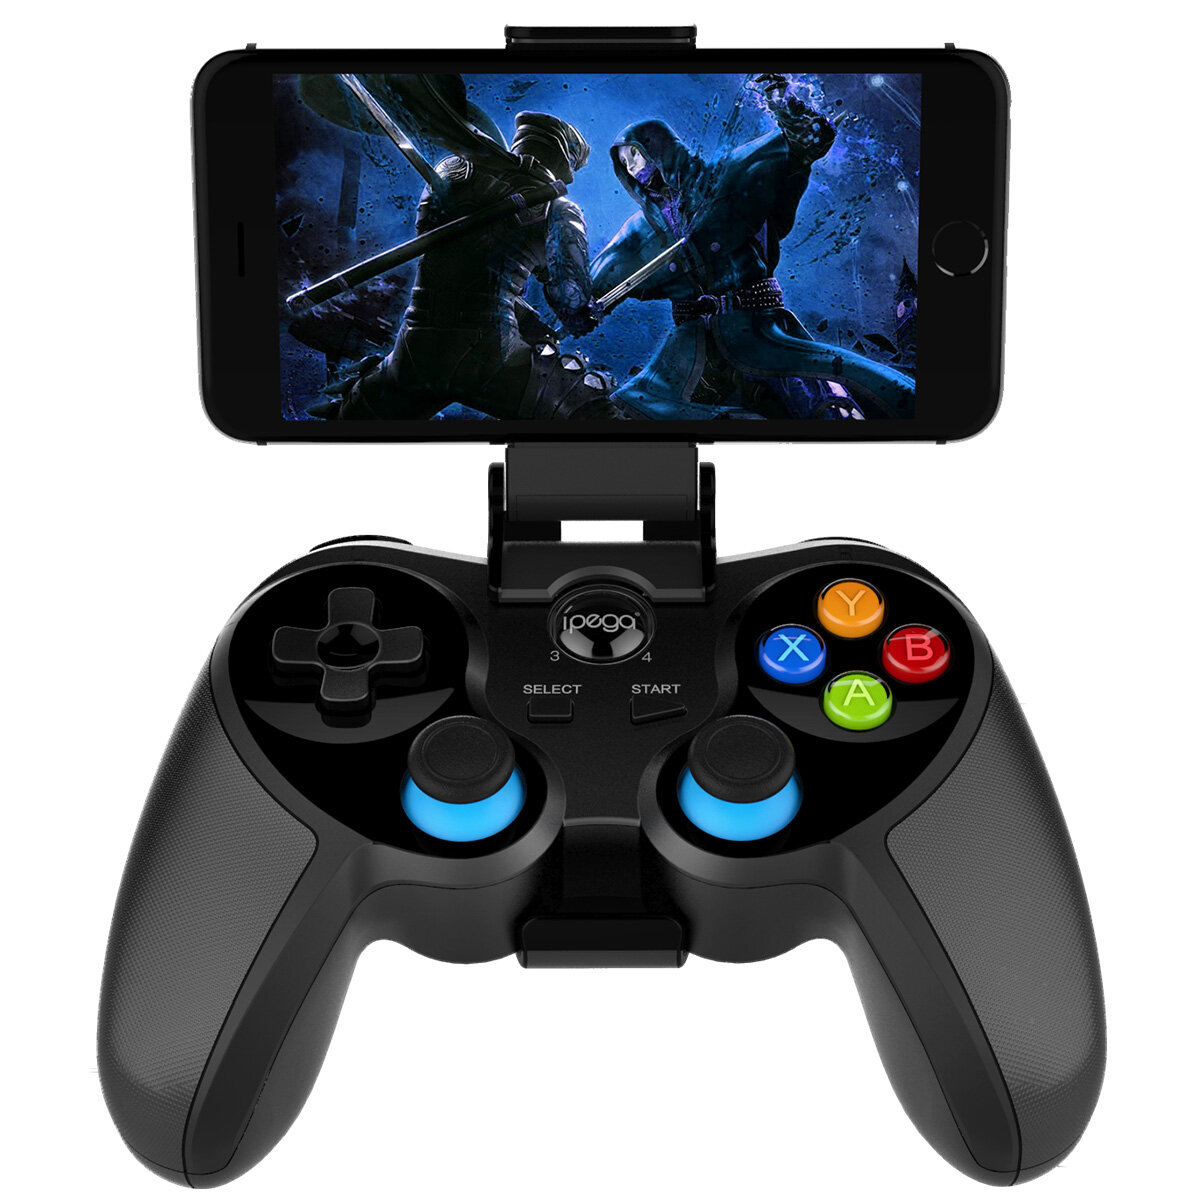 

IPEGA PG-9157 bluetooth Wireless Game Controller Remote Gamepad Joystick For iOS Android Devices